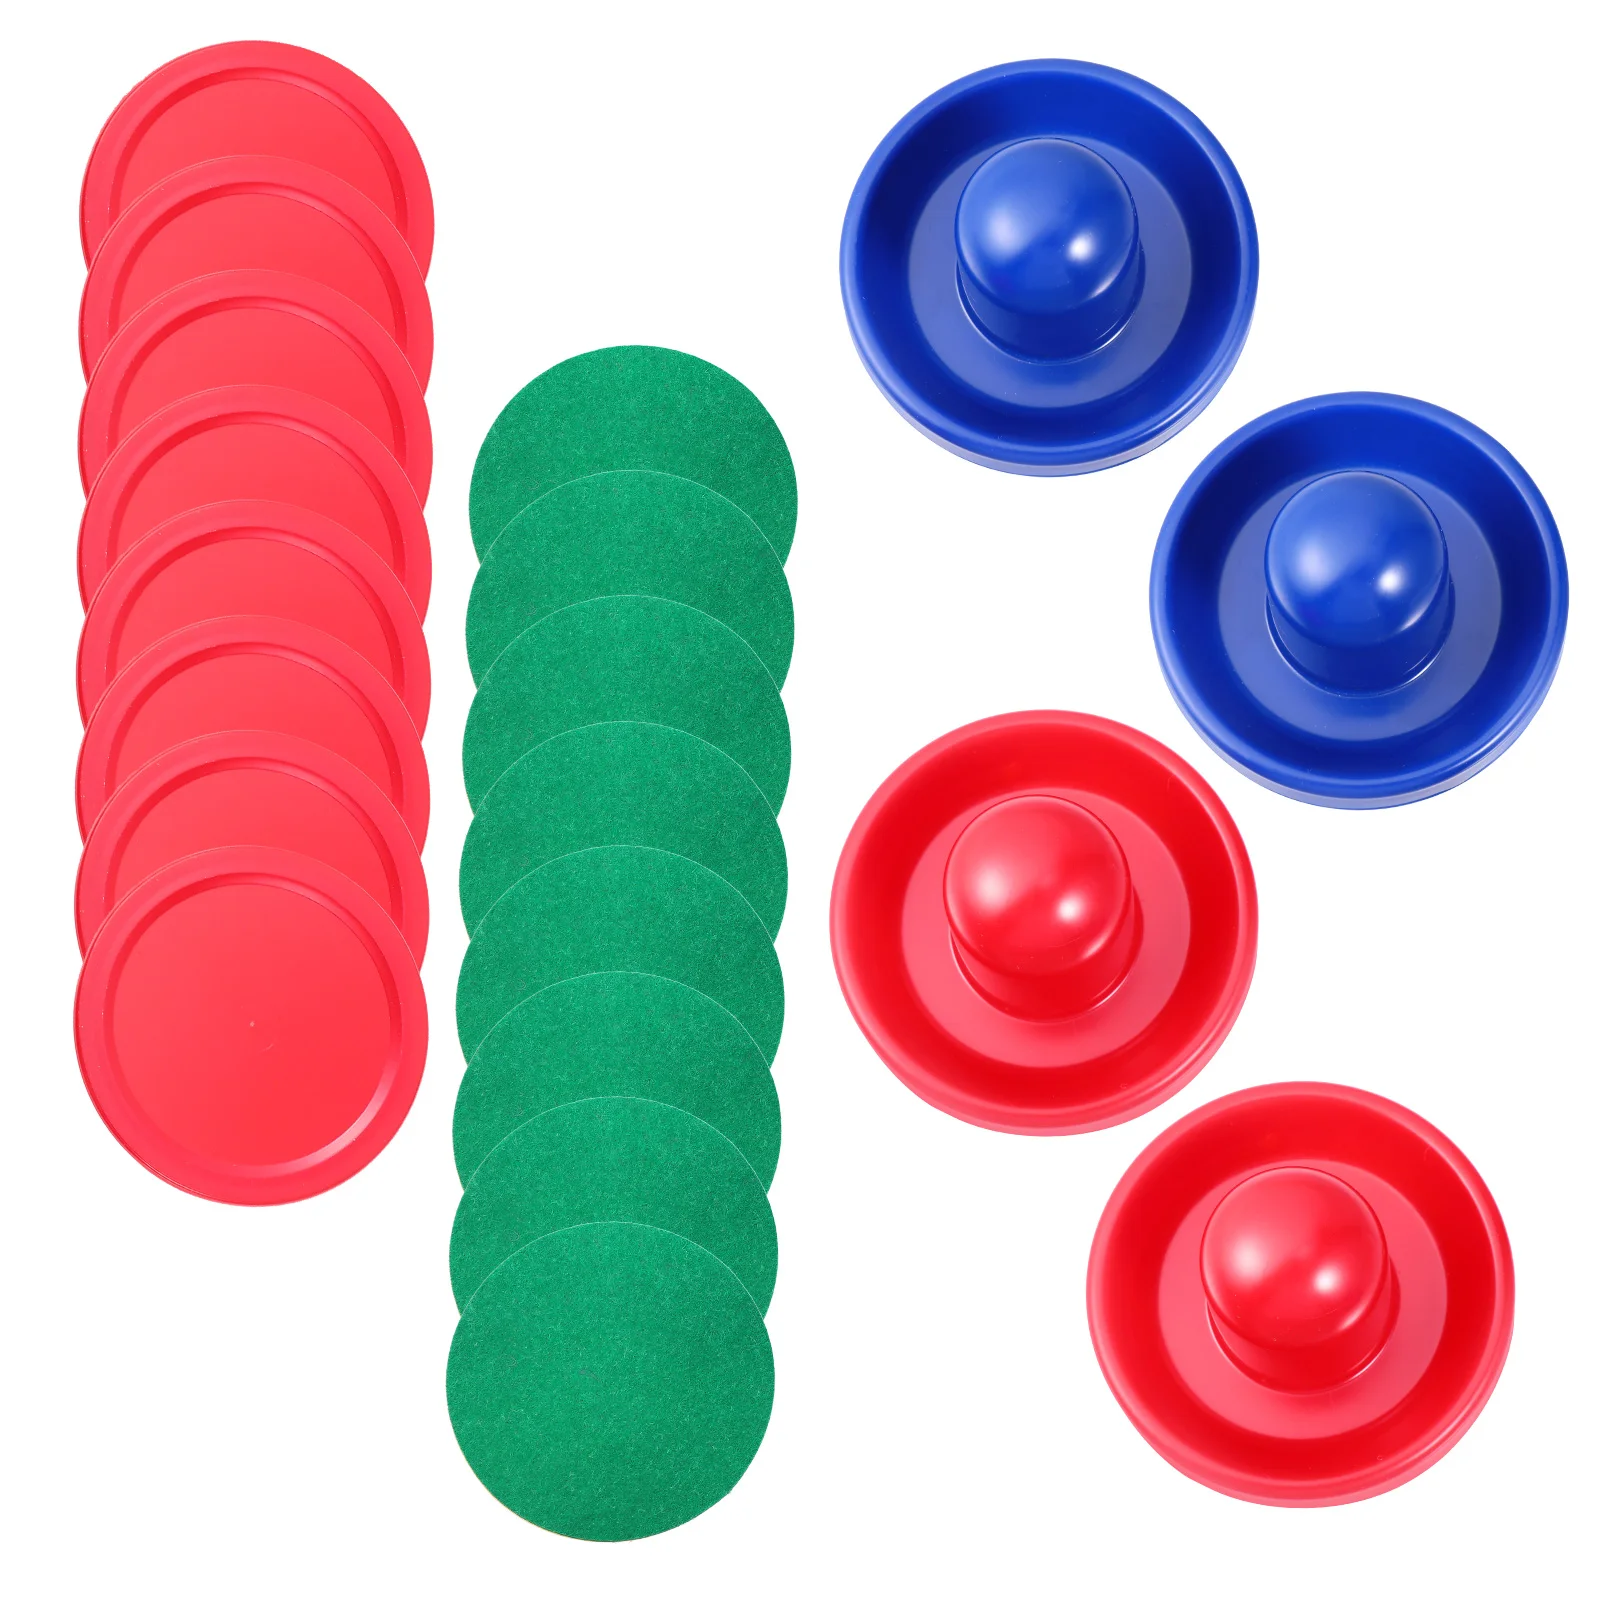 

Air Hockey Pushers Air Hockey Paddles Replacement Pucks& Pusher for Game Tables Accessories 96mm